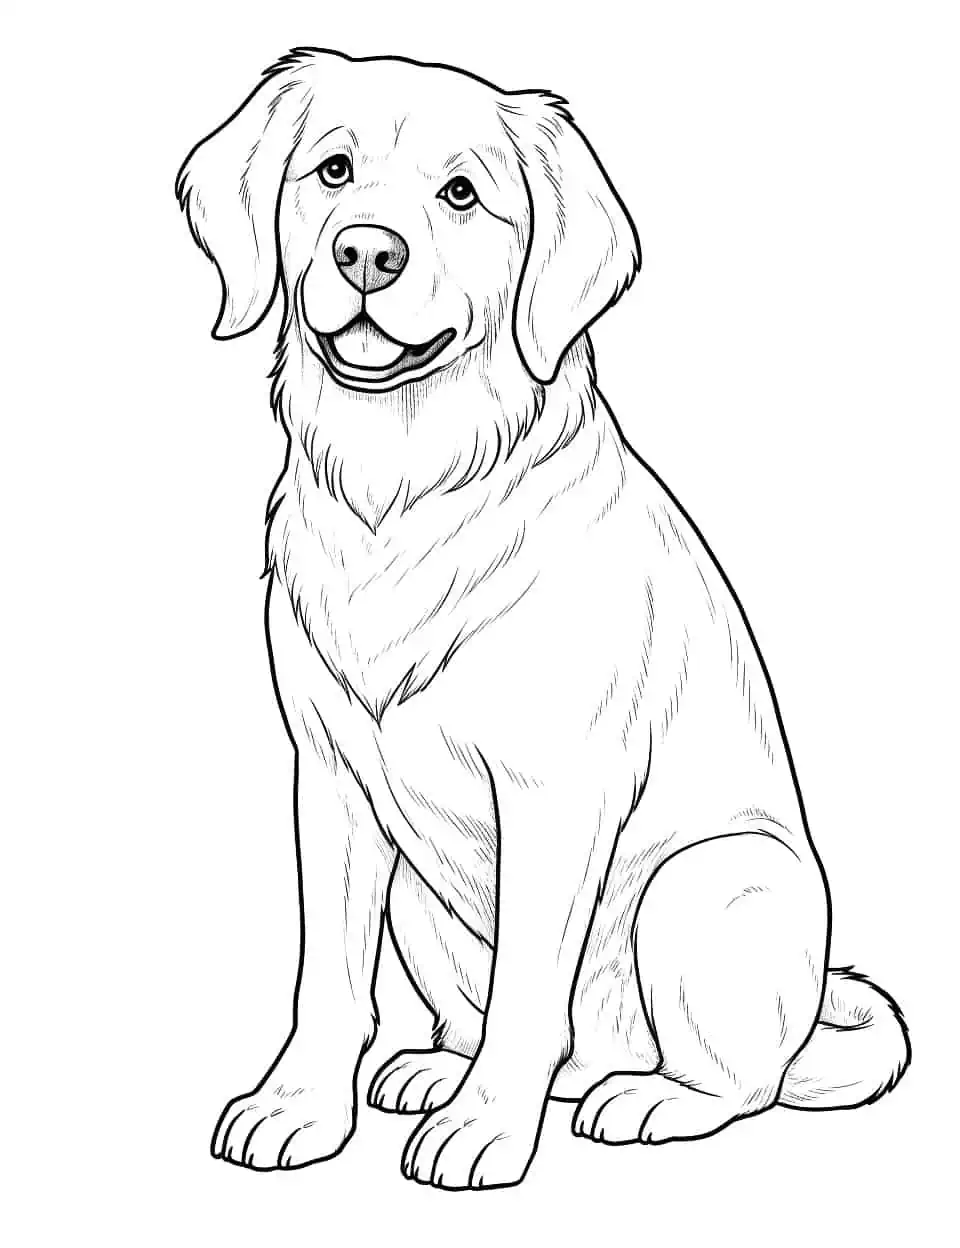 Realistic Golden Retriever Dog Coloring Page - A coloring page that showcases a realistic depiction of a Golden Retriever, sitting and looking off into the distance.